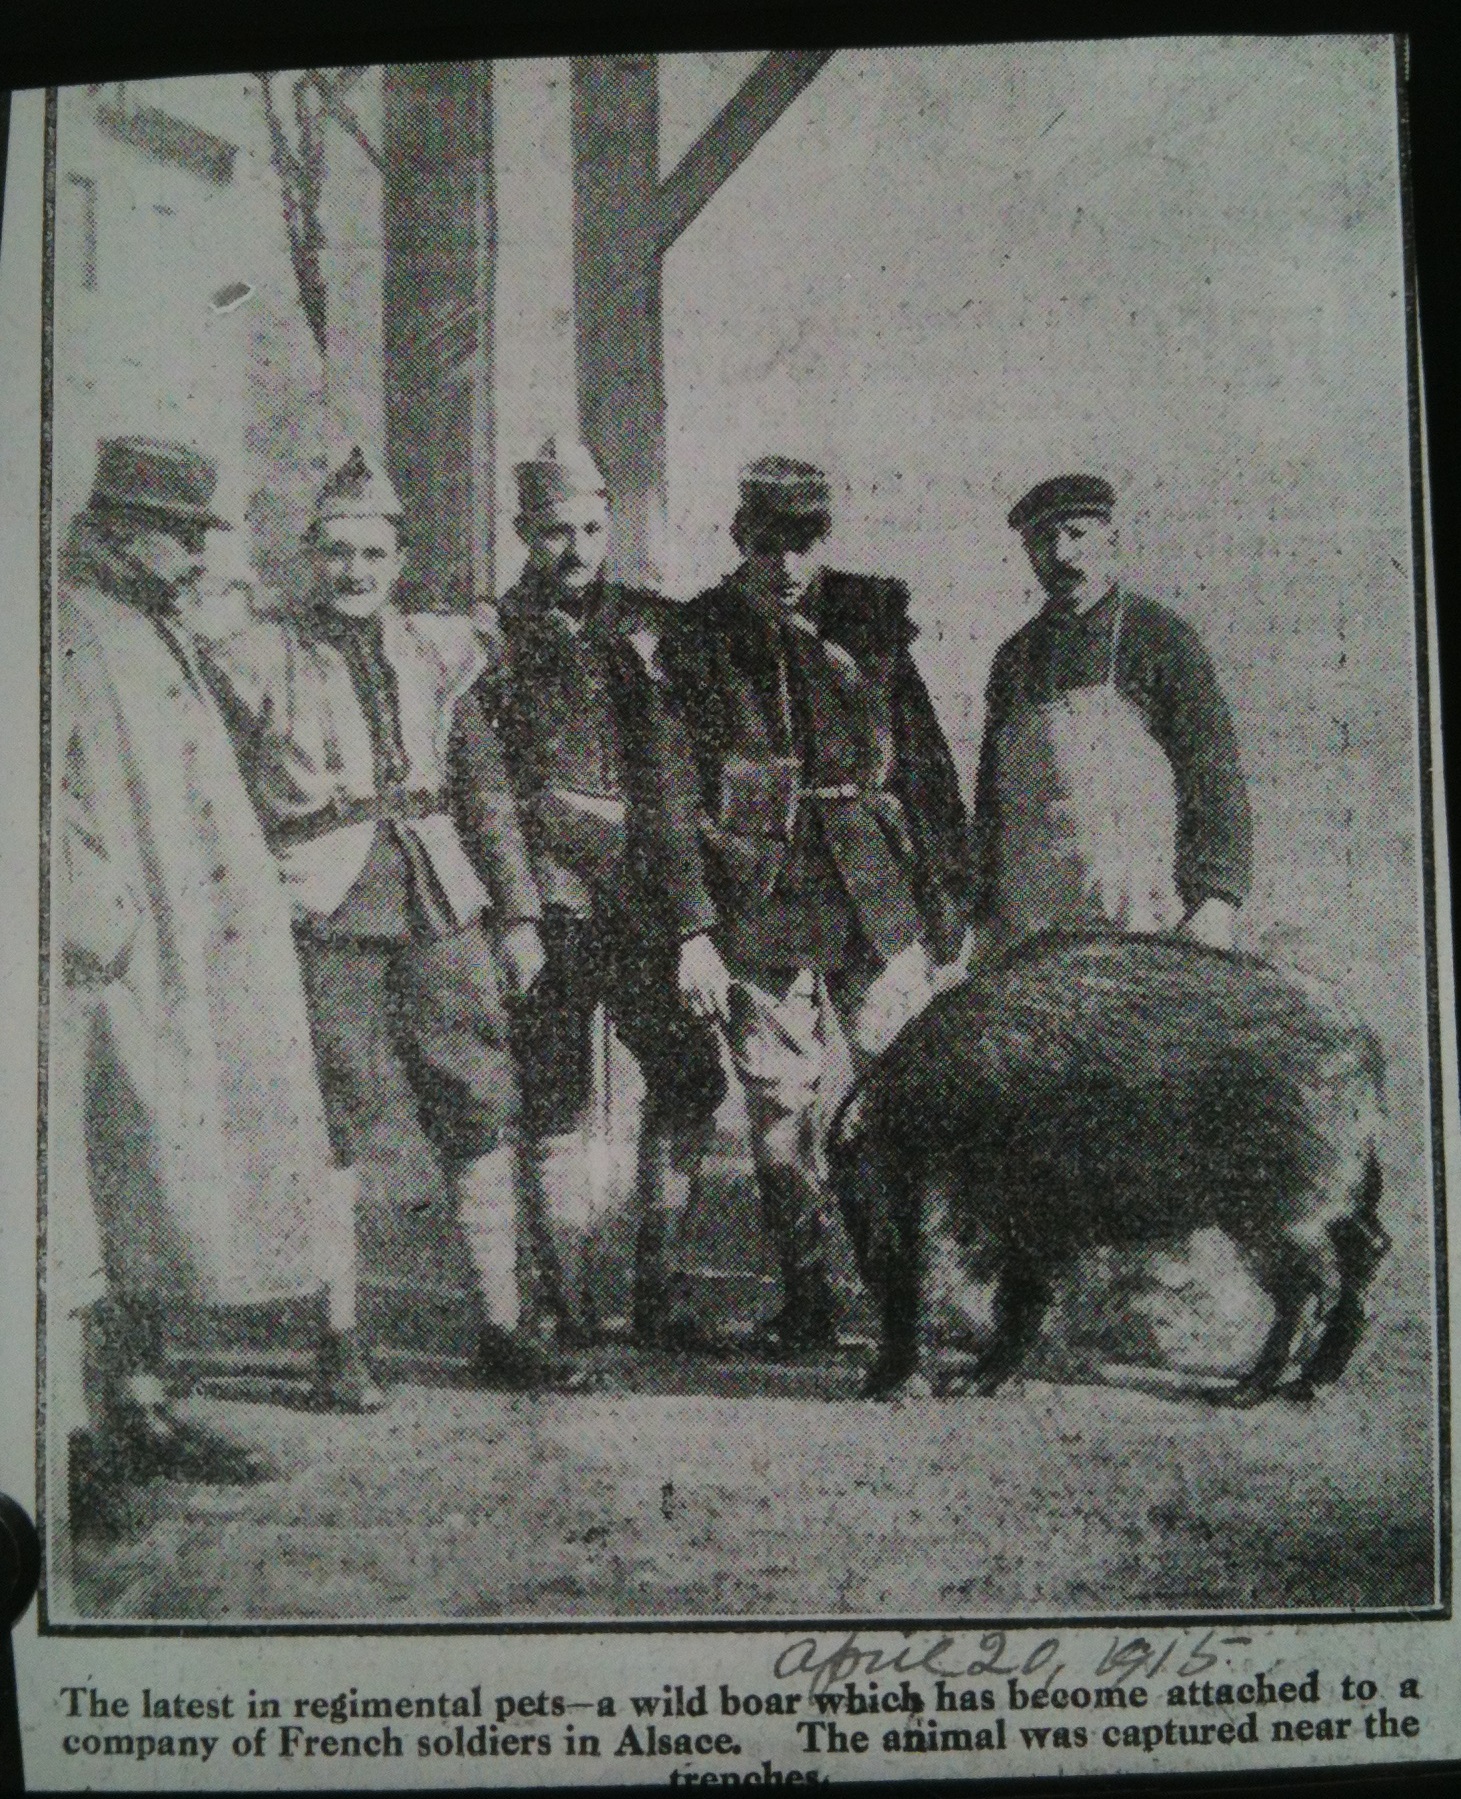 Boar Captured by French in WWI